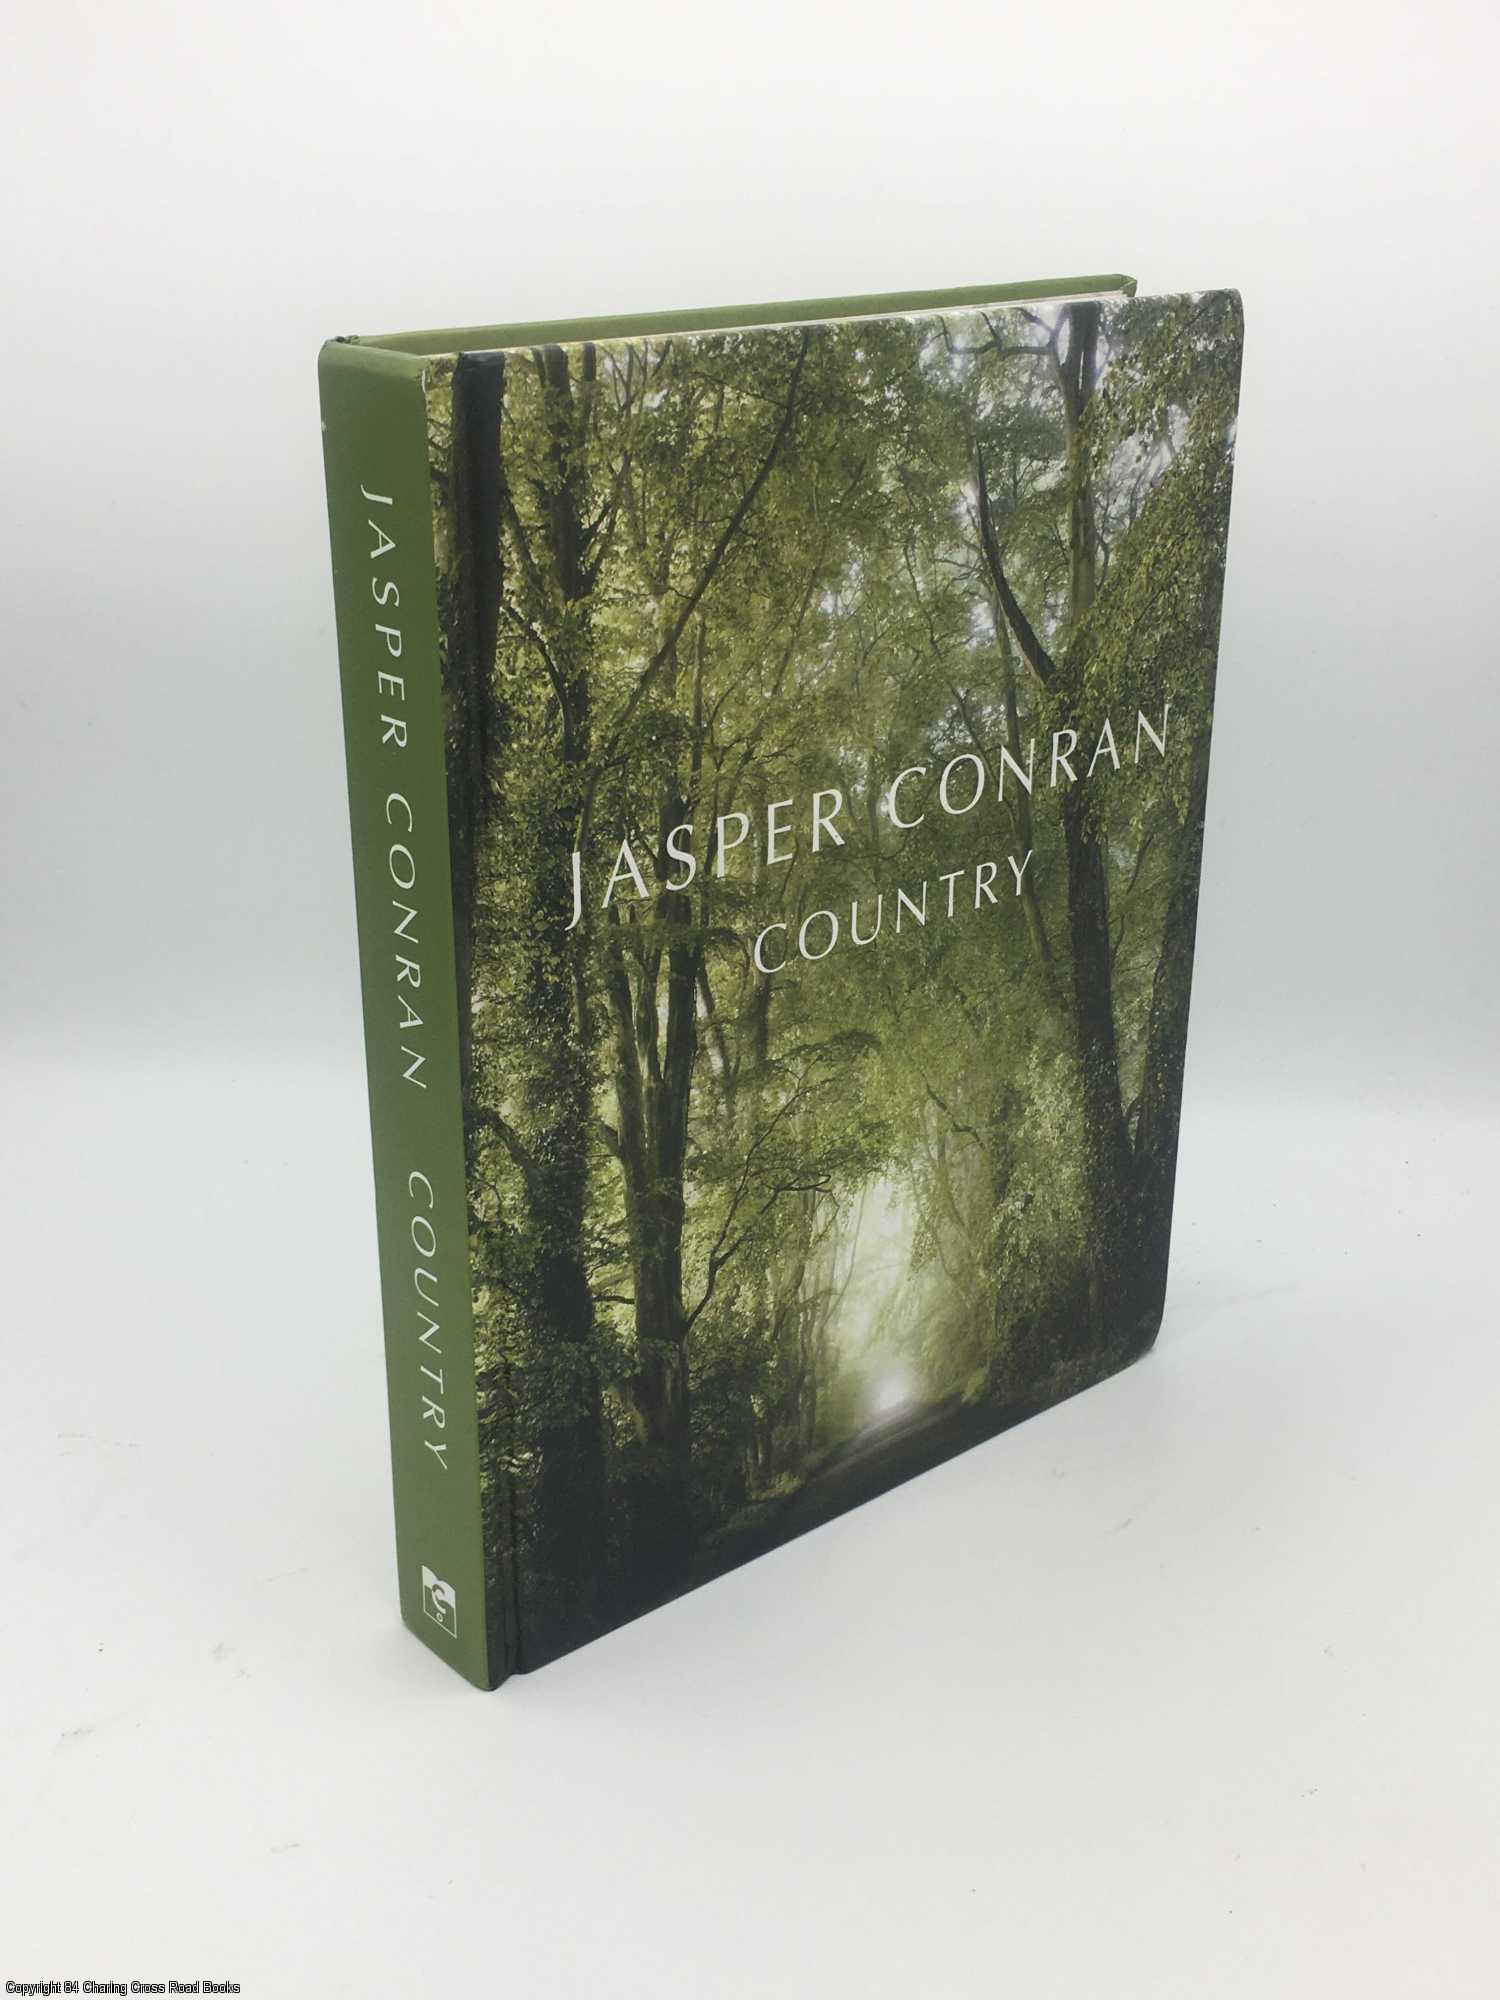 Country by Jasper Conran on 84 Charing Cross Rare Books